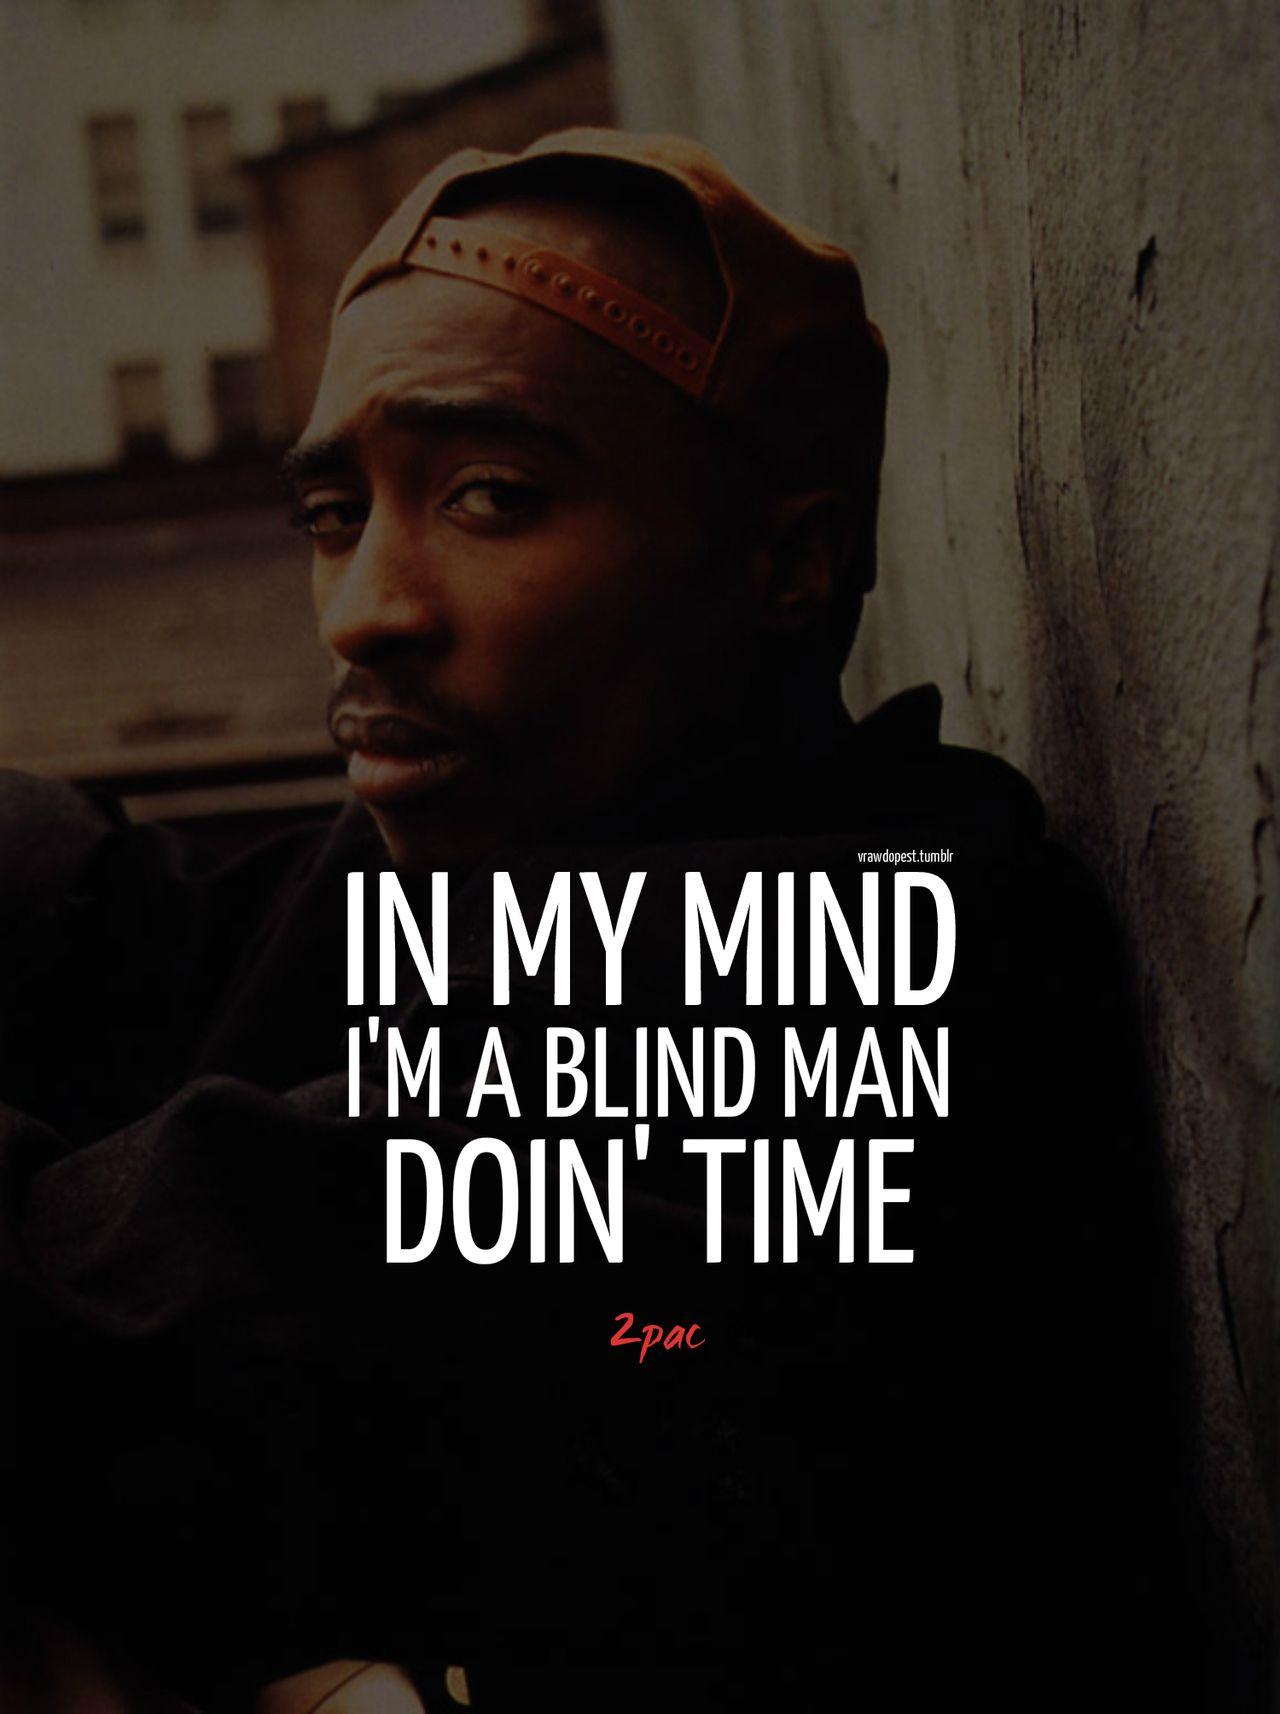 2pac quotes biography